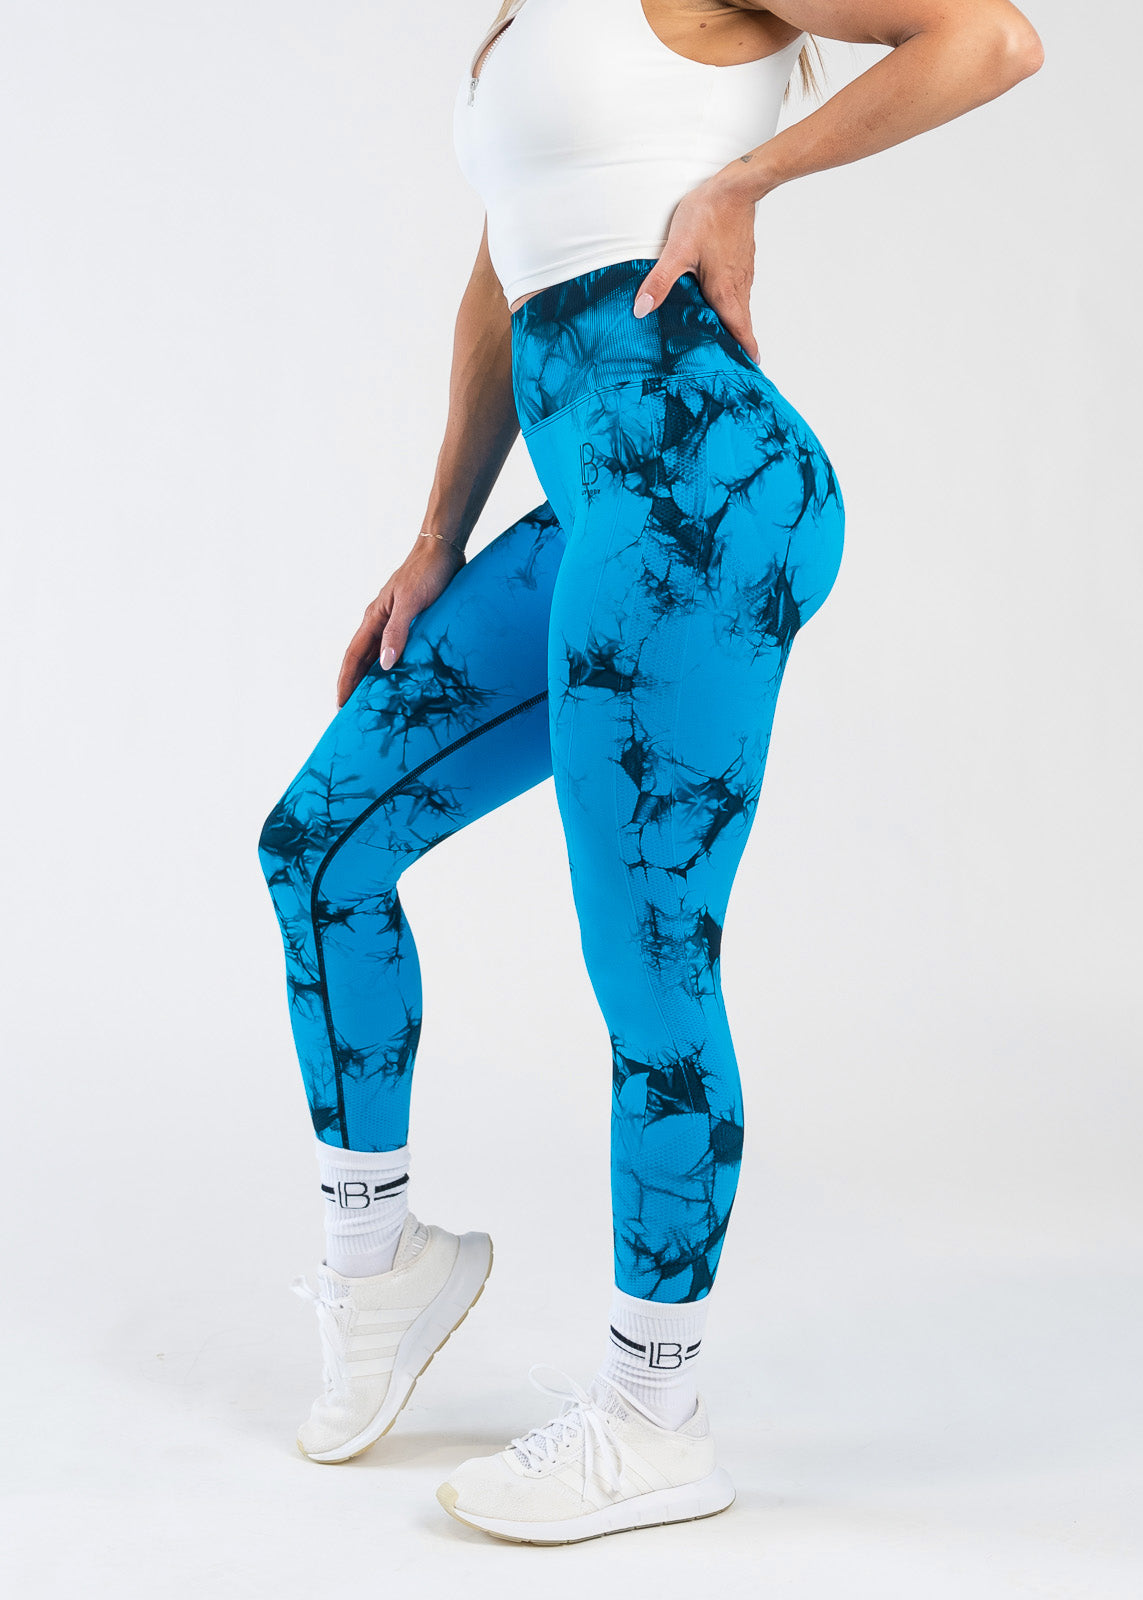 Printed V Cut Seamless Leggings For Women Fashionable Workout